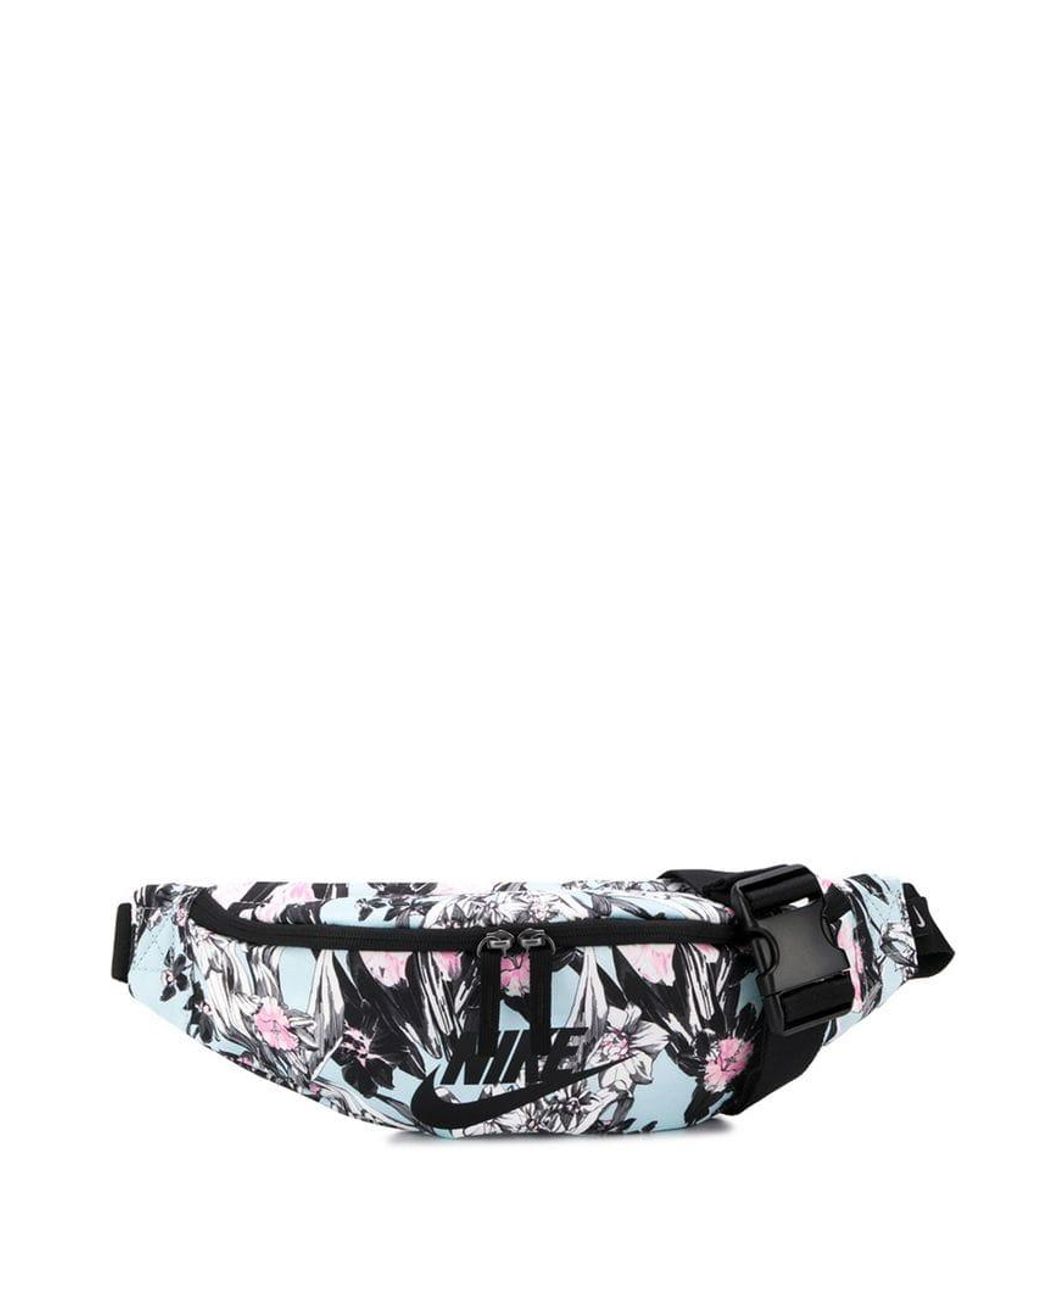 Nike Heritage Floral Print Fanny Pack in Black | Lyst Canada